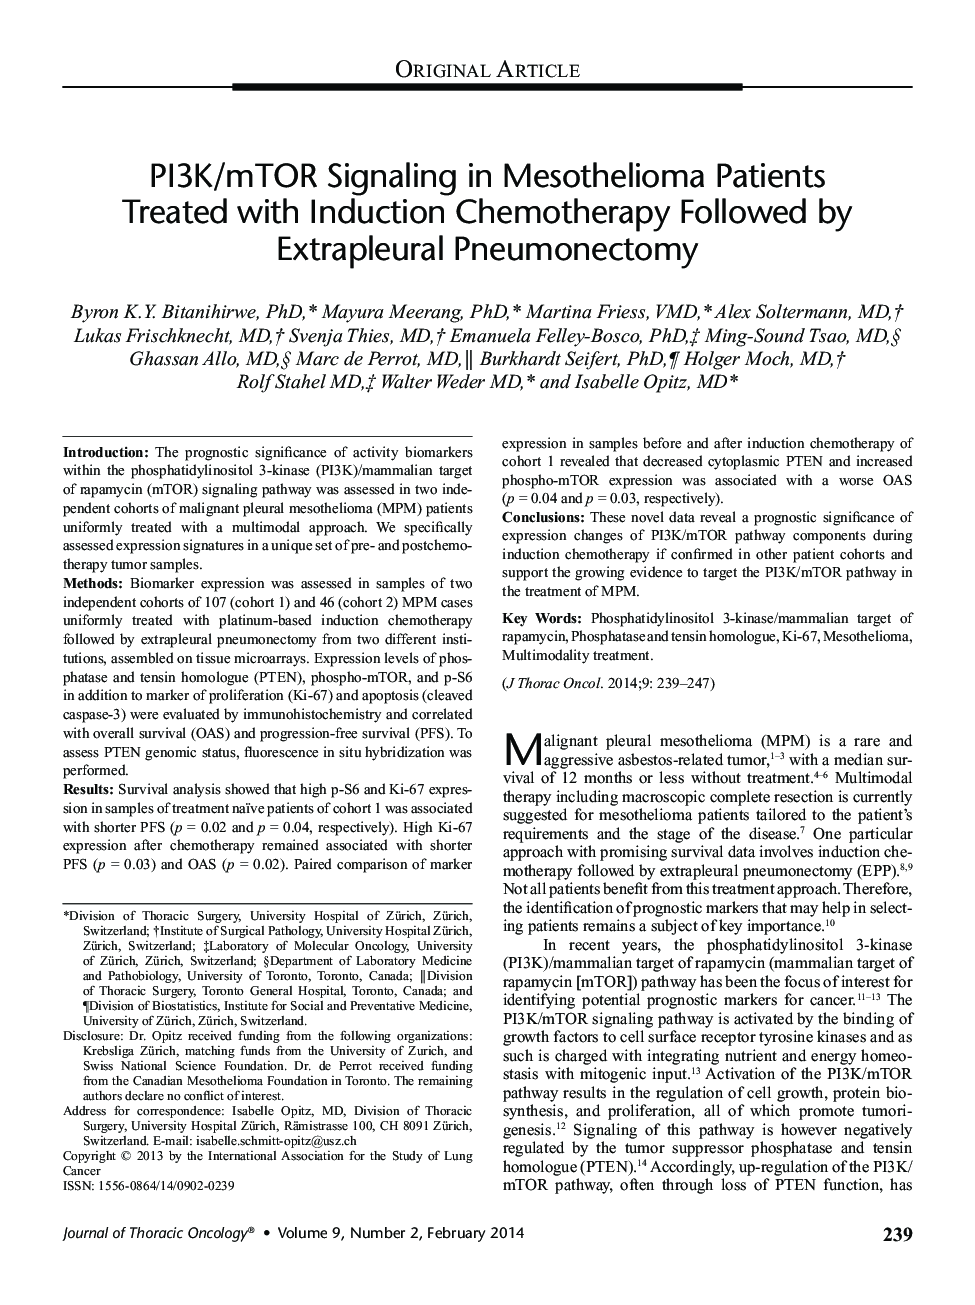 PI3K/mTOR Signaling in Mesothelioma Patients Treated with Induction Chemotherapy Followed by Extrapleural Pneumonectomy